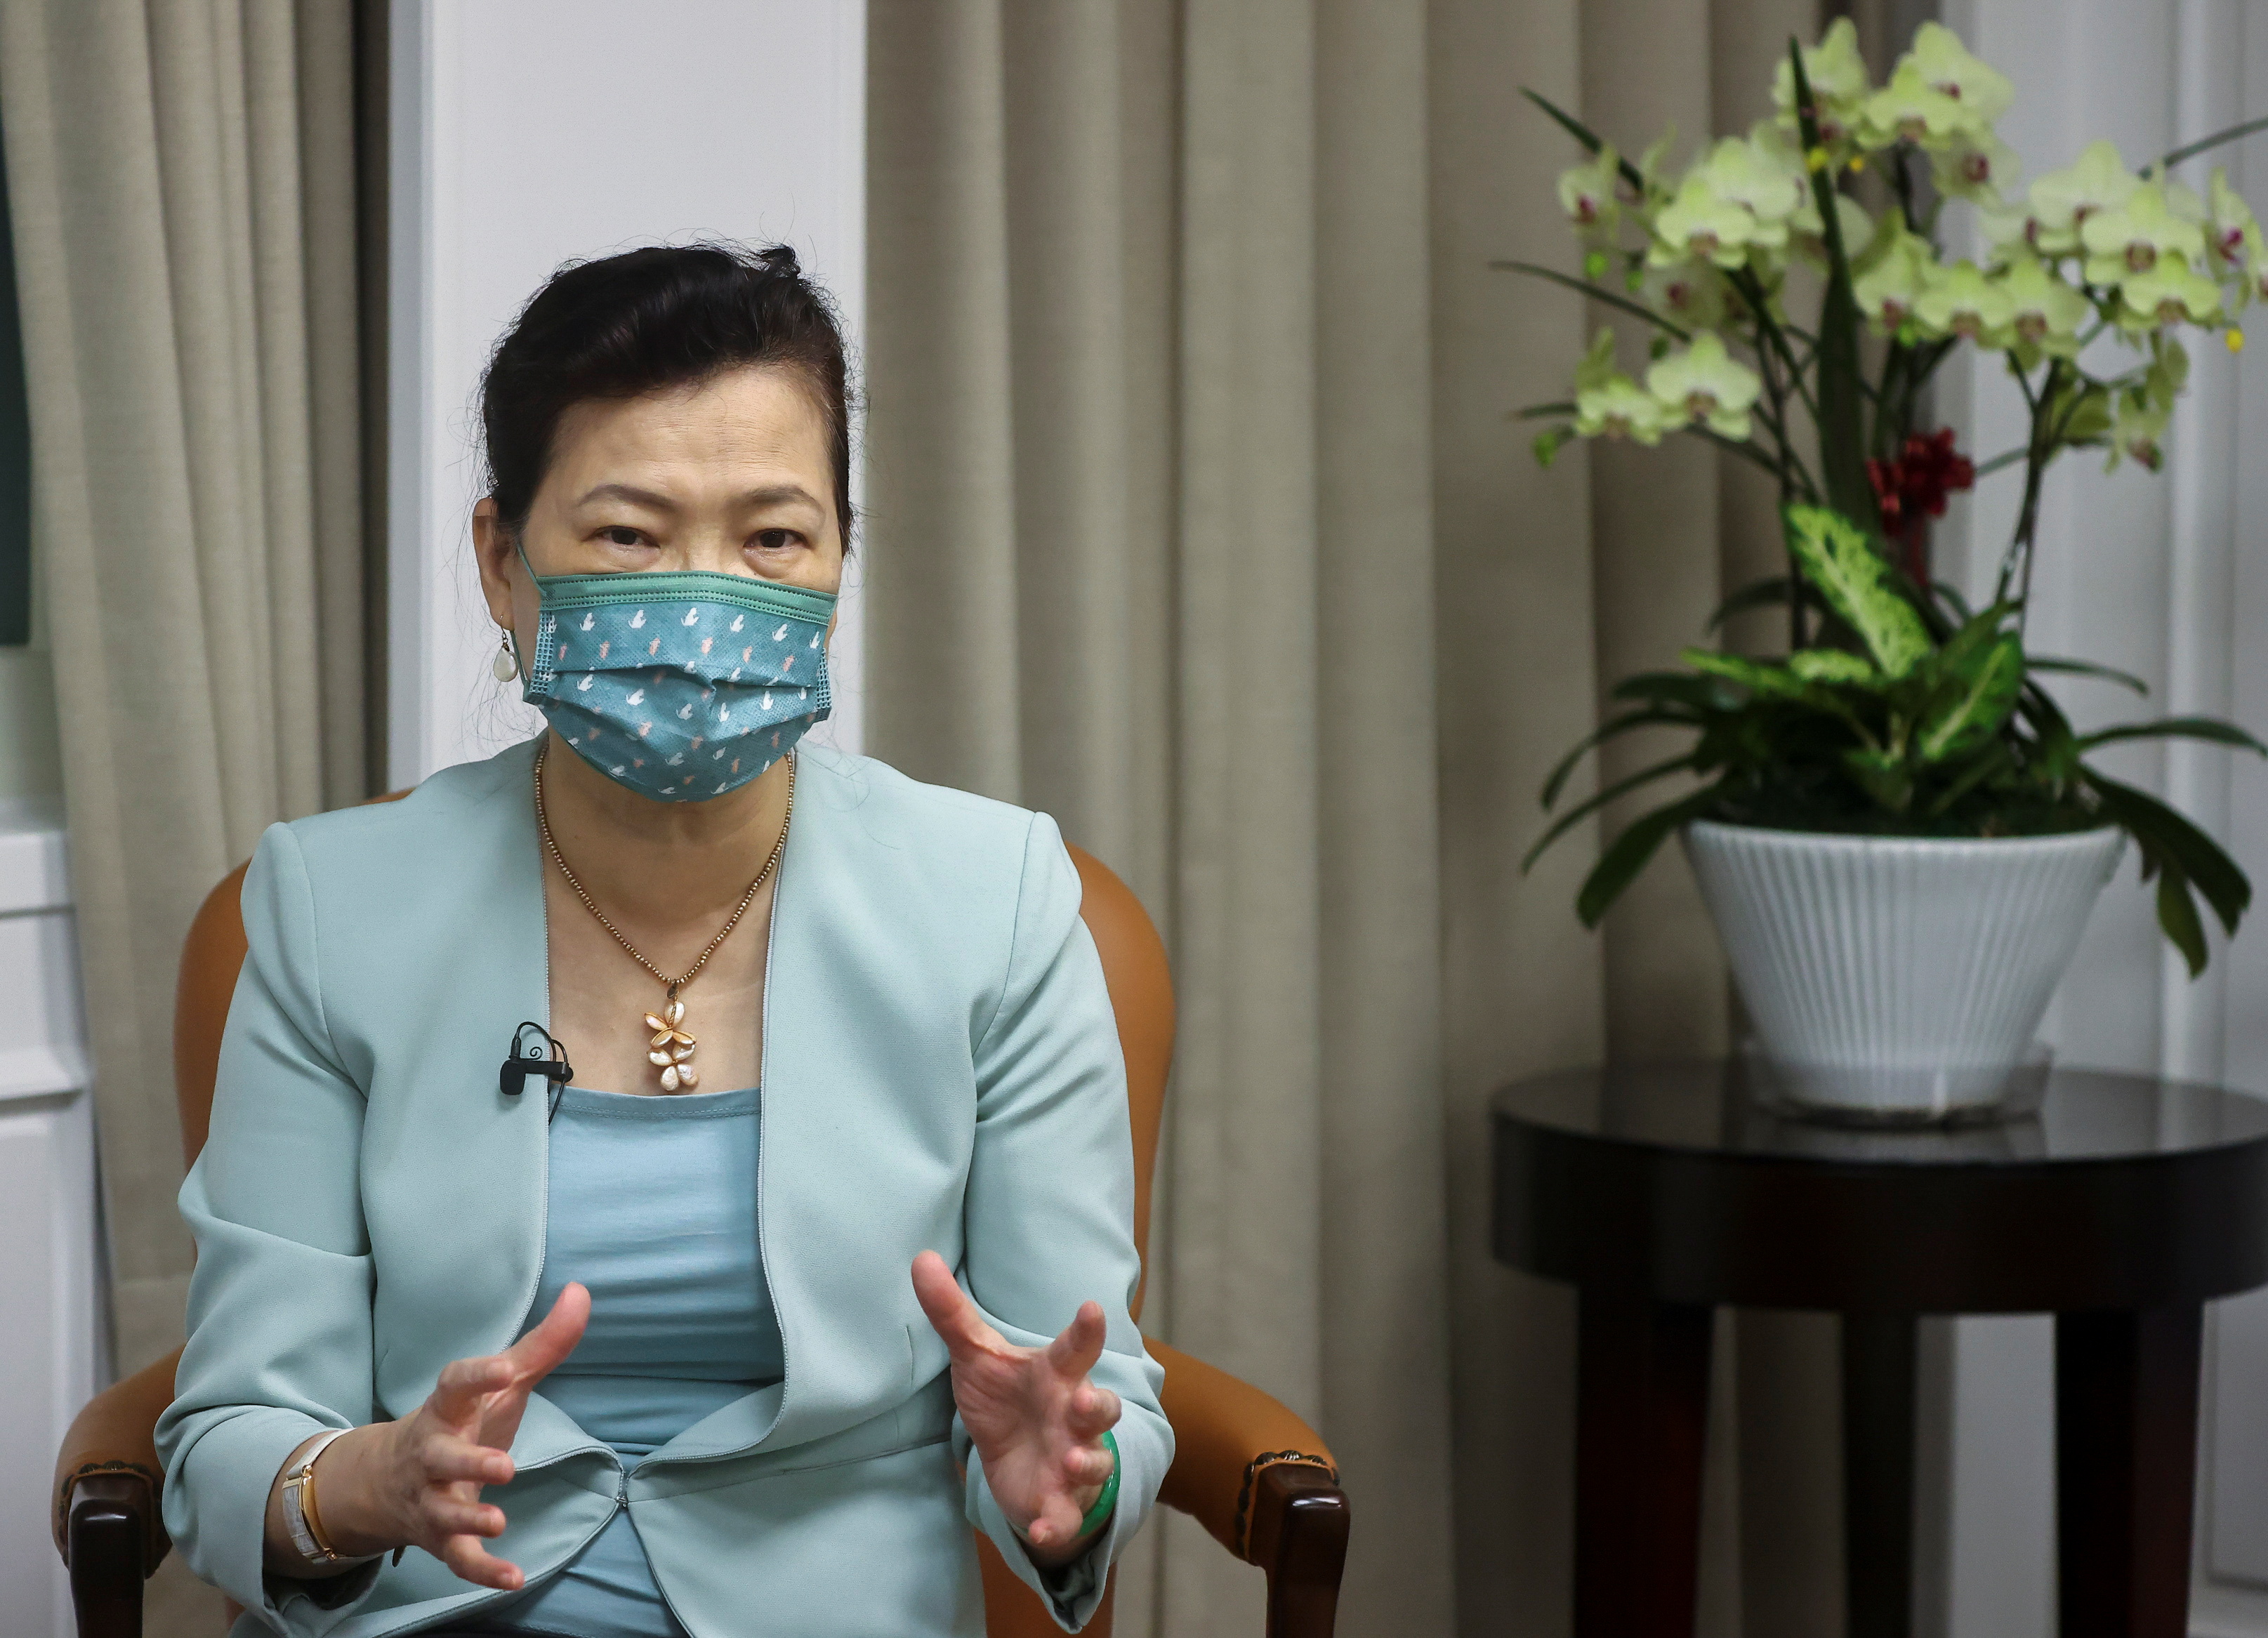 Taiwan Economy Minister Wang Mei-hua speaks during an interview with Reuters in Taipei